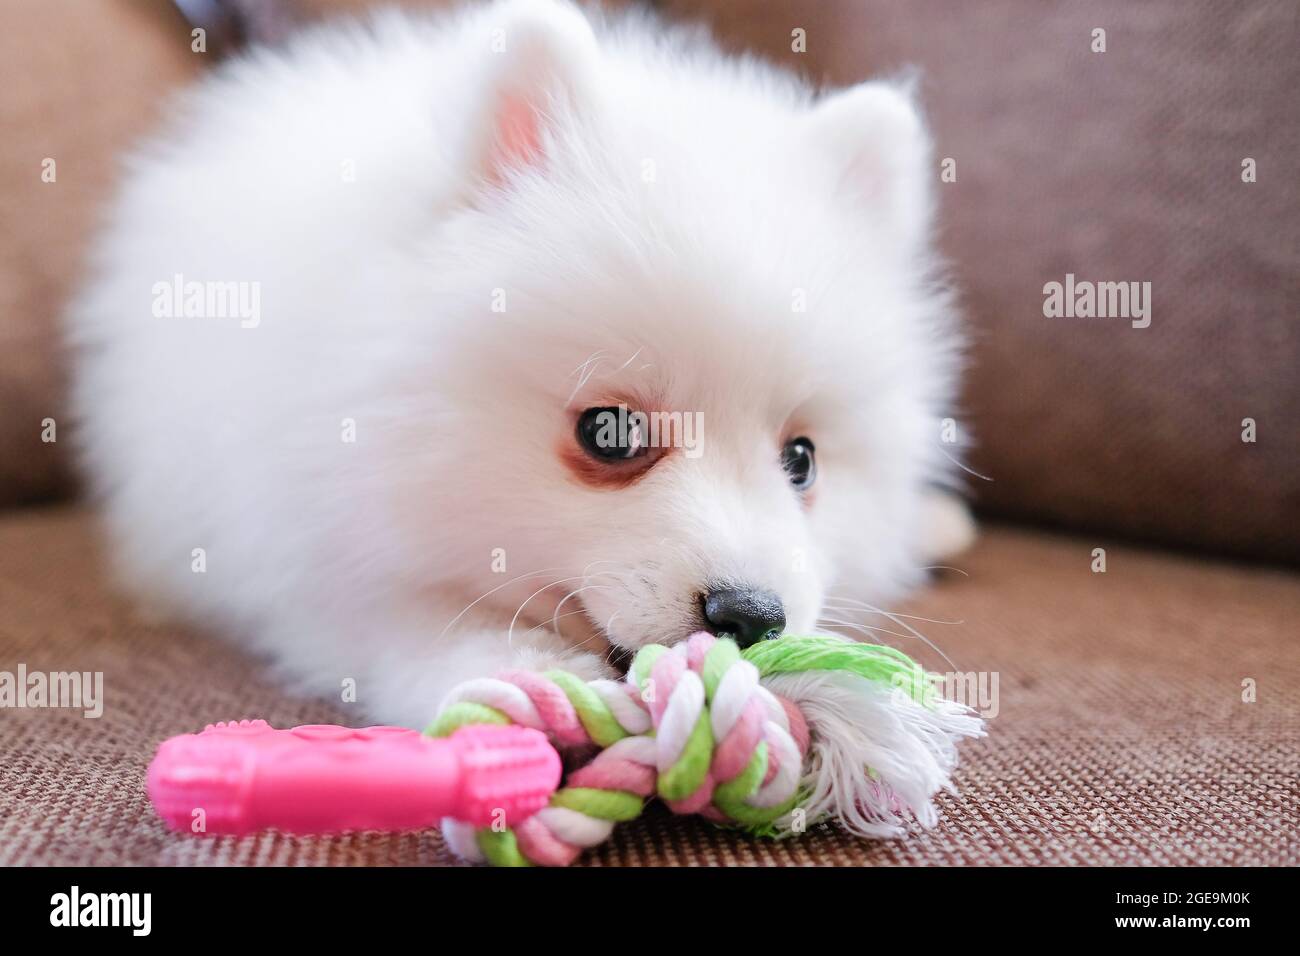 Japanese Spitz Puppy Gnaws A Rubber Toy On The Couch Stock Photo Alamy